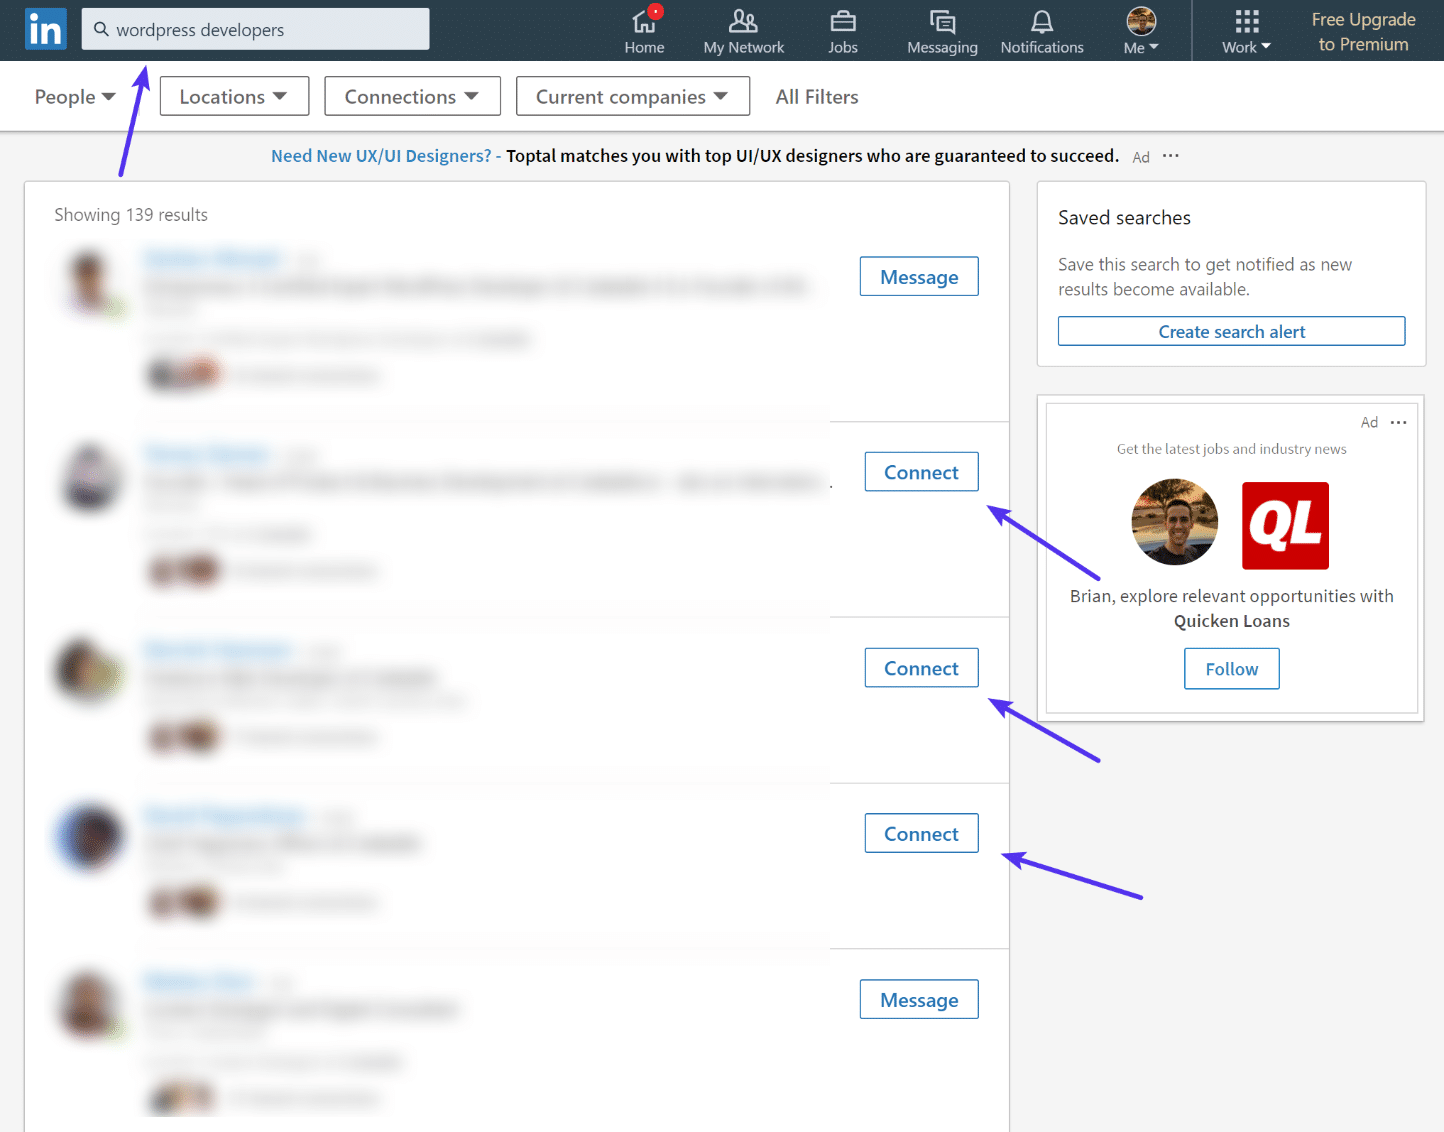 New connections on LinkedIn